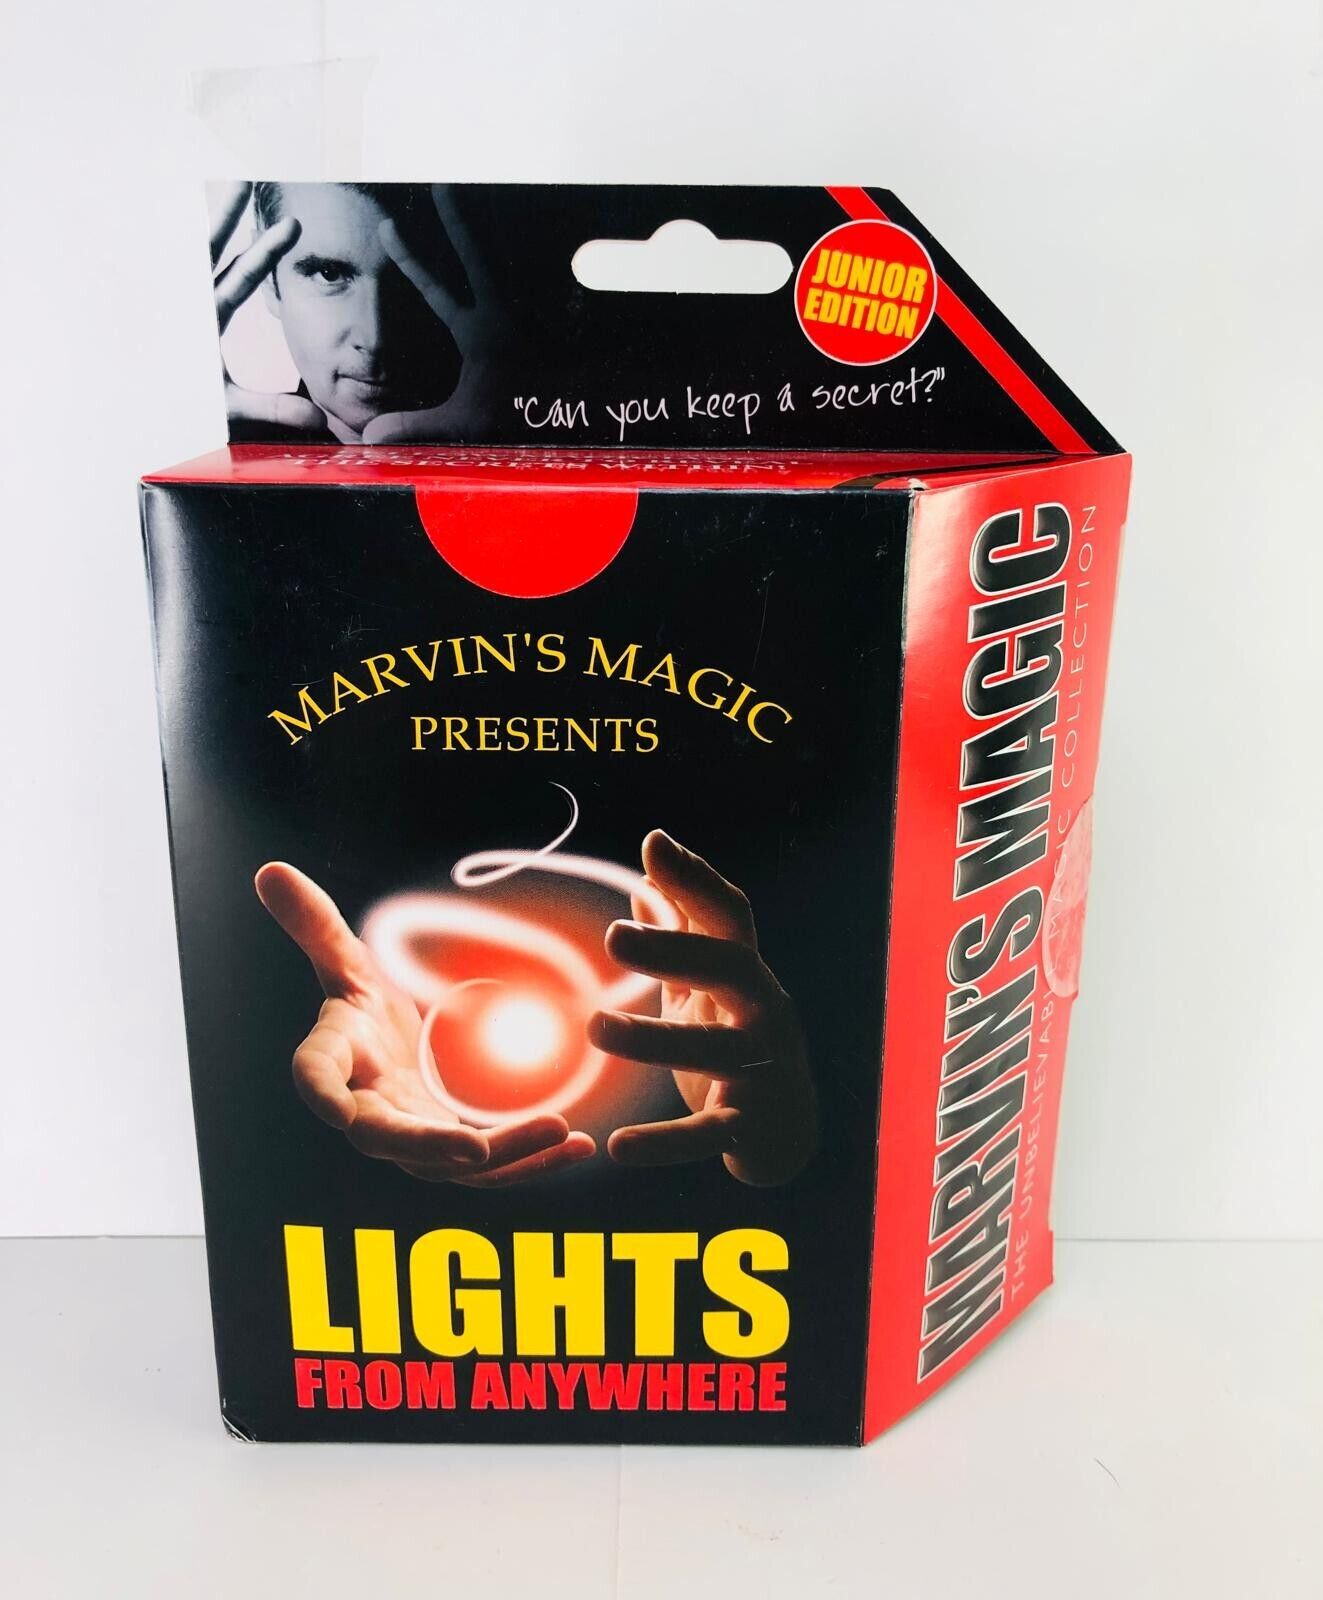 Marvin's Magic - Lights from Everywhere - Junior Edition